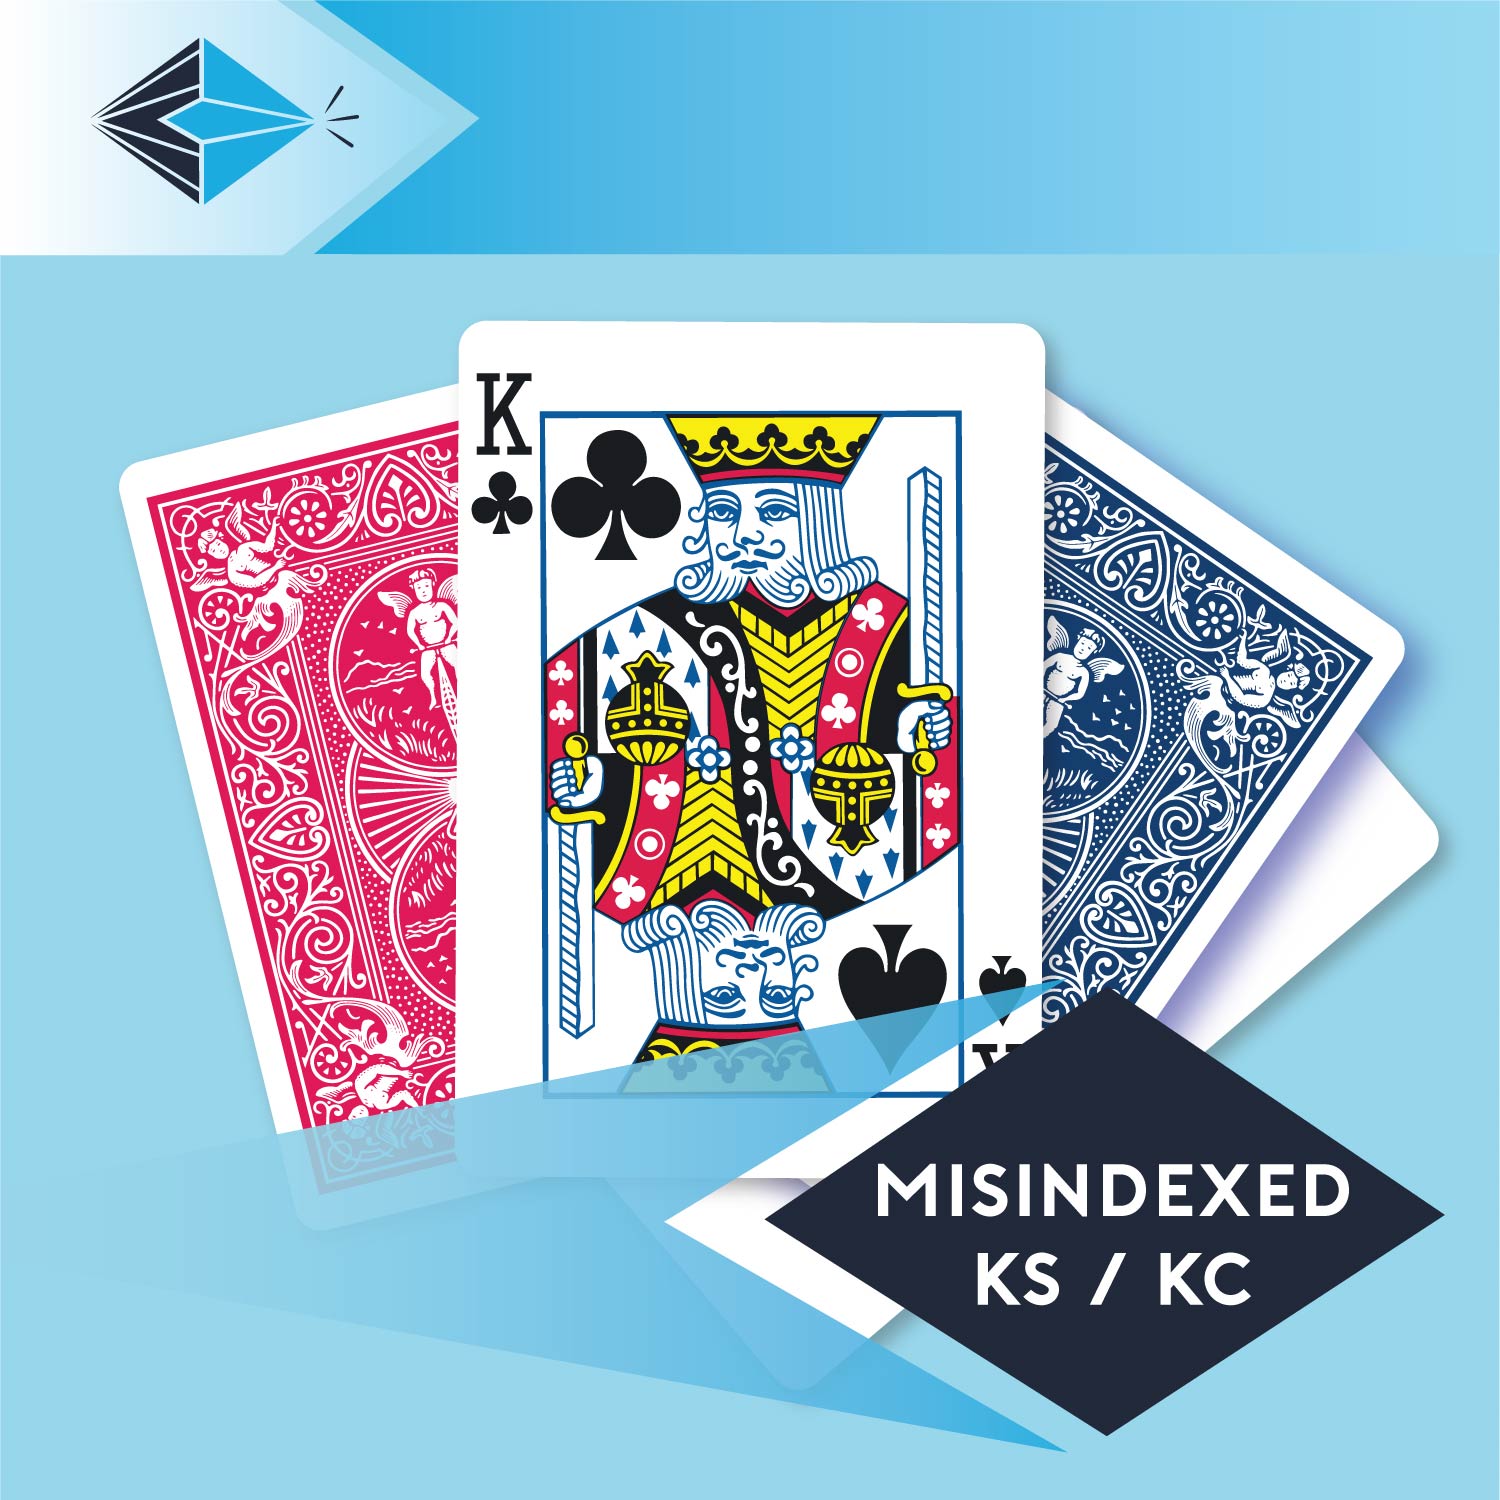 mis-indexed-king-spades-clubs-ks-kc-playing card for magicians printing printers Stockport Manchester UK